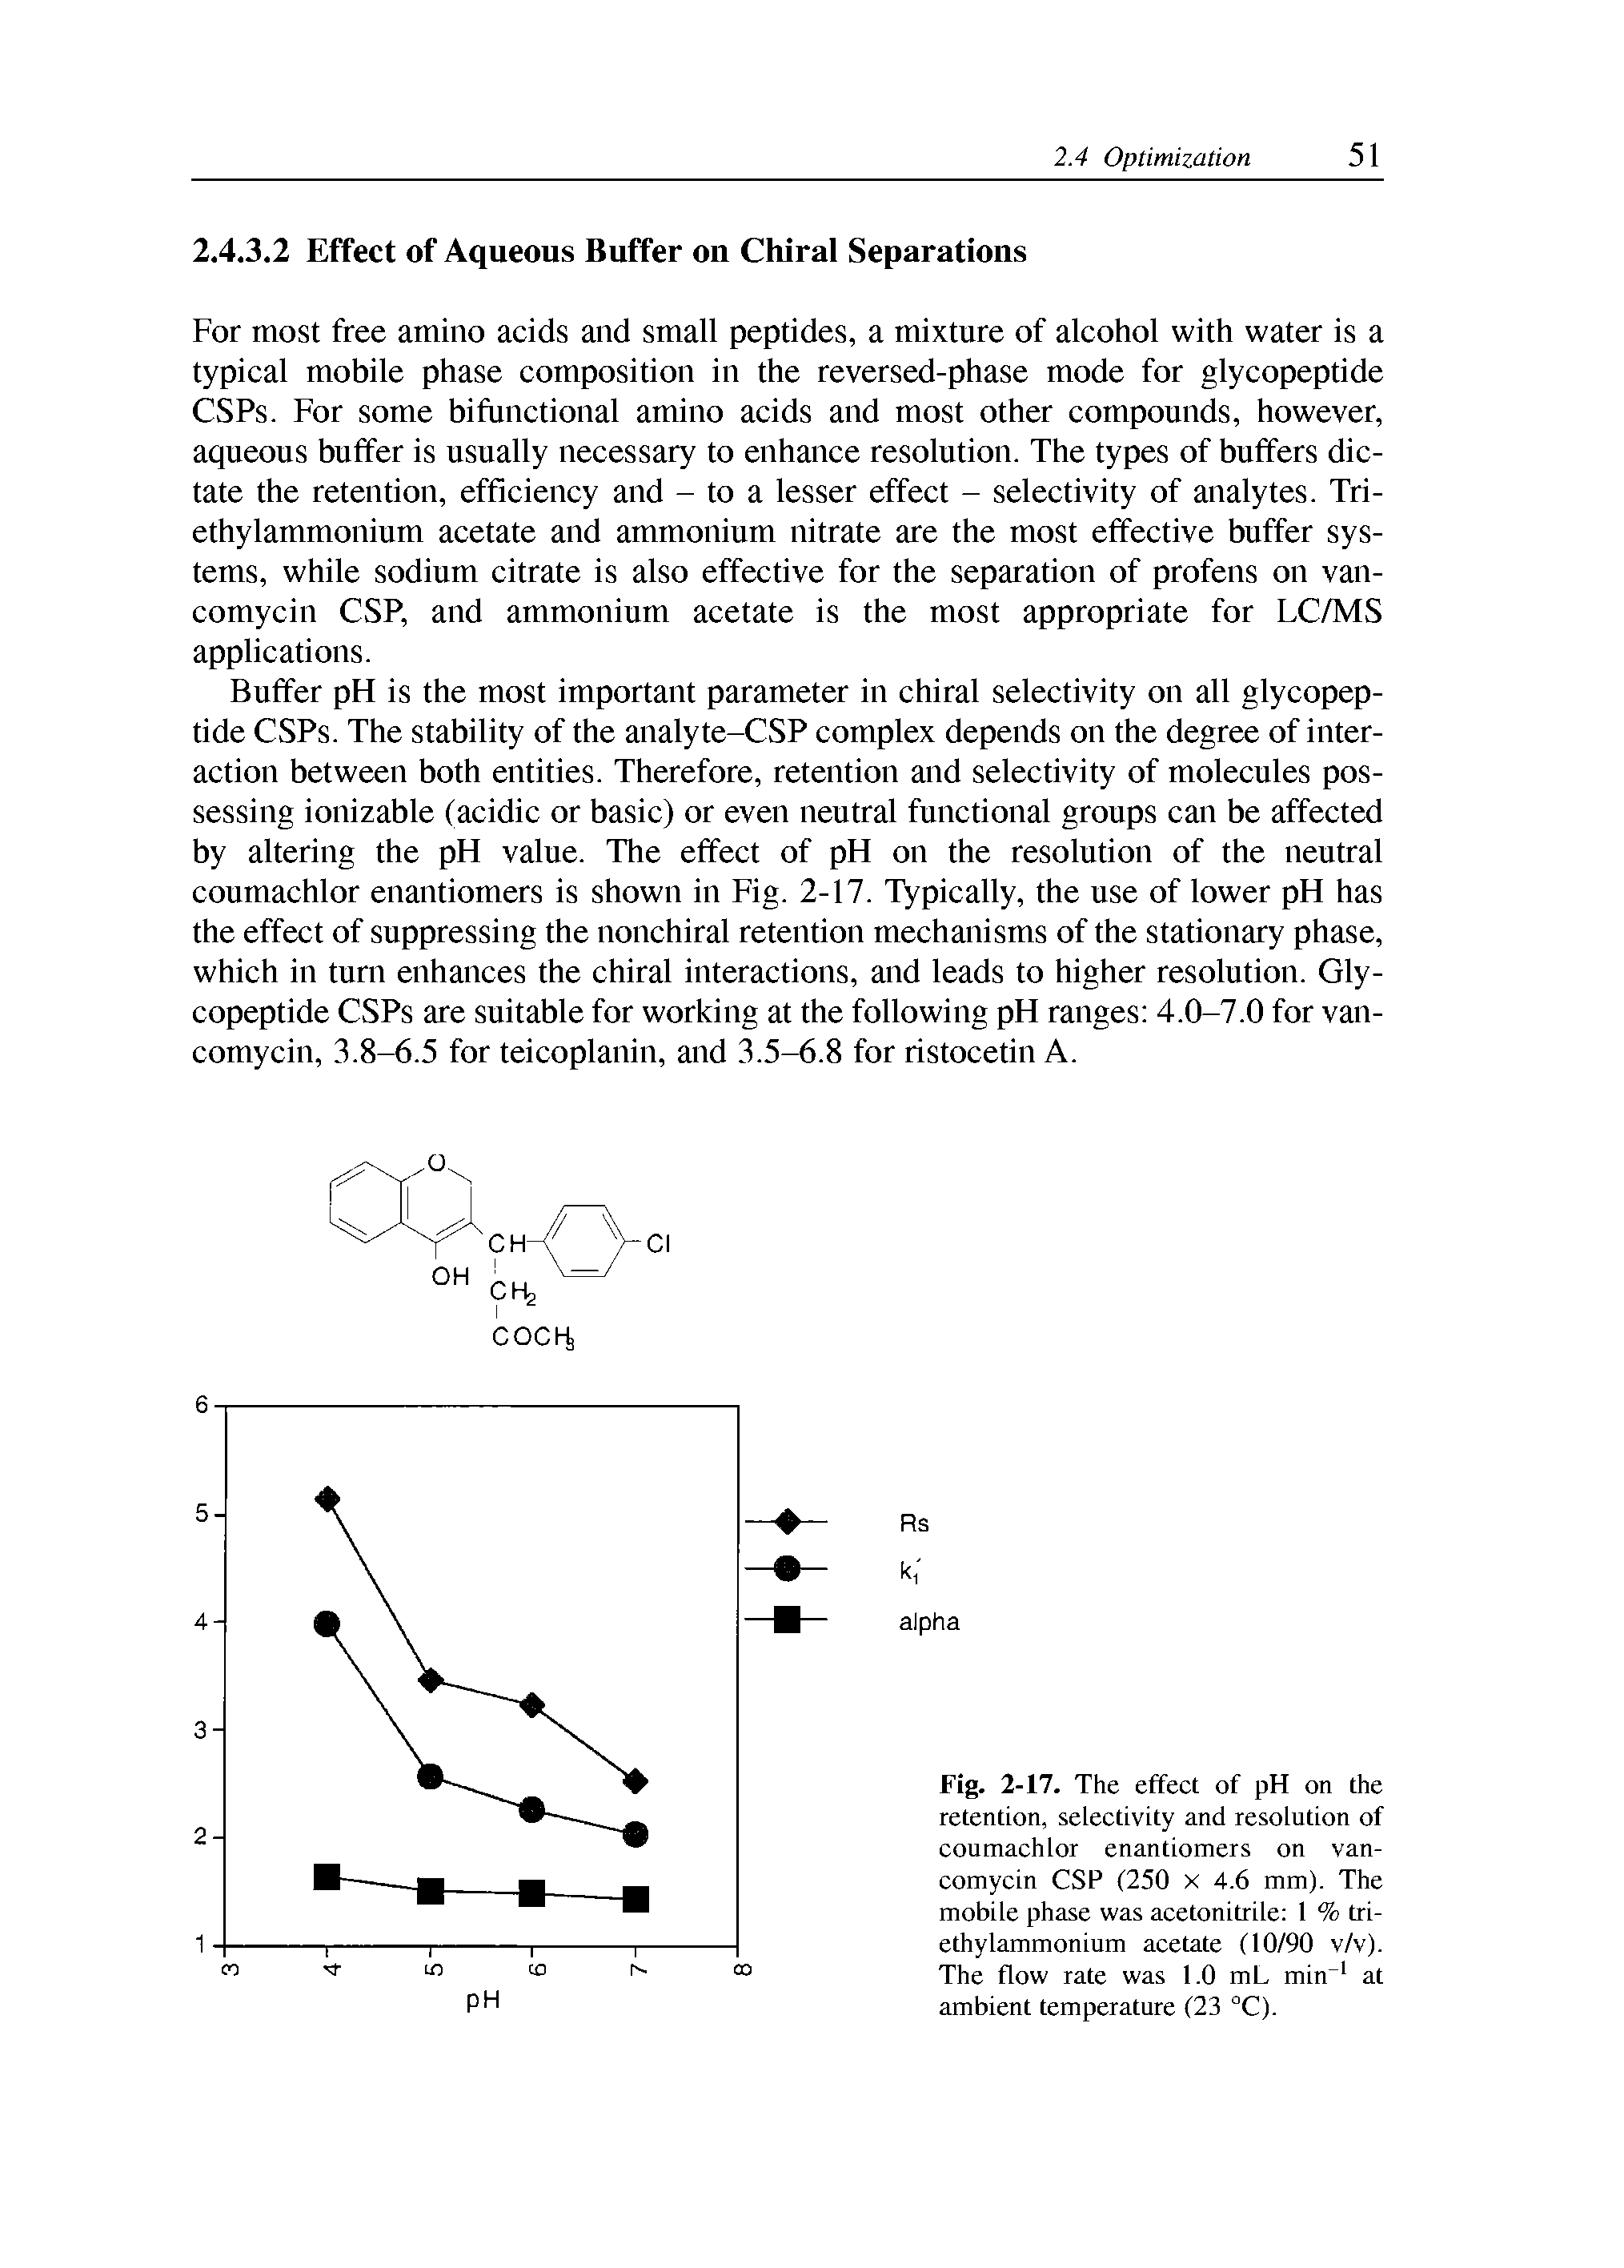 Fig. 2-17. The effect of pH on the retention, selectivity and resolution of coumachlor enantiomers on vancomycin CSP (250 X 4.6 mm). The mobile phase was acetonitrile 1 % tri-ethylammonium acetate (10/90 v/v). The flow rate was 1.0 mL min at ambient temperature (23 °C).